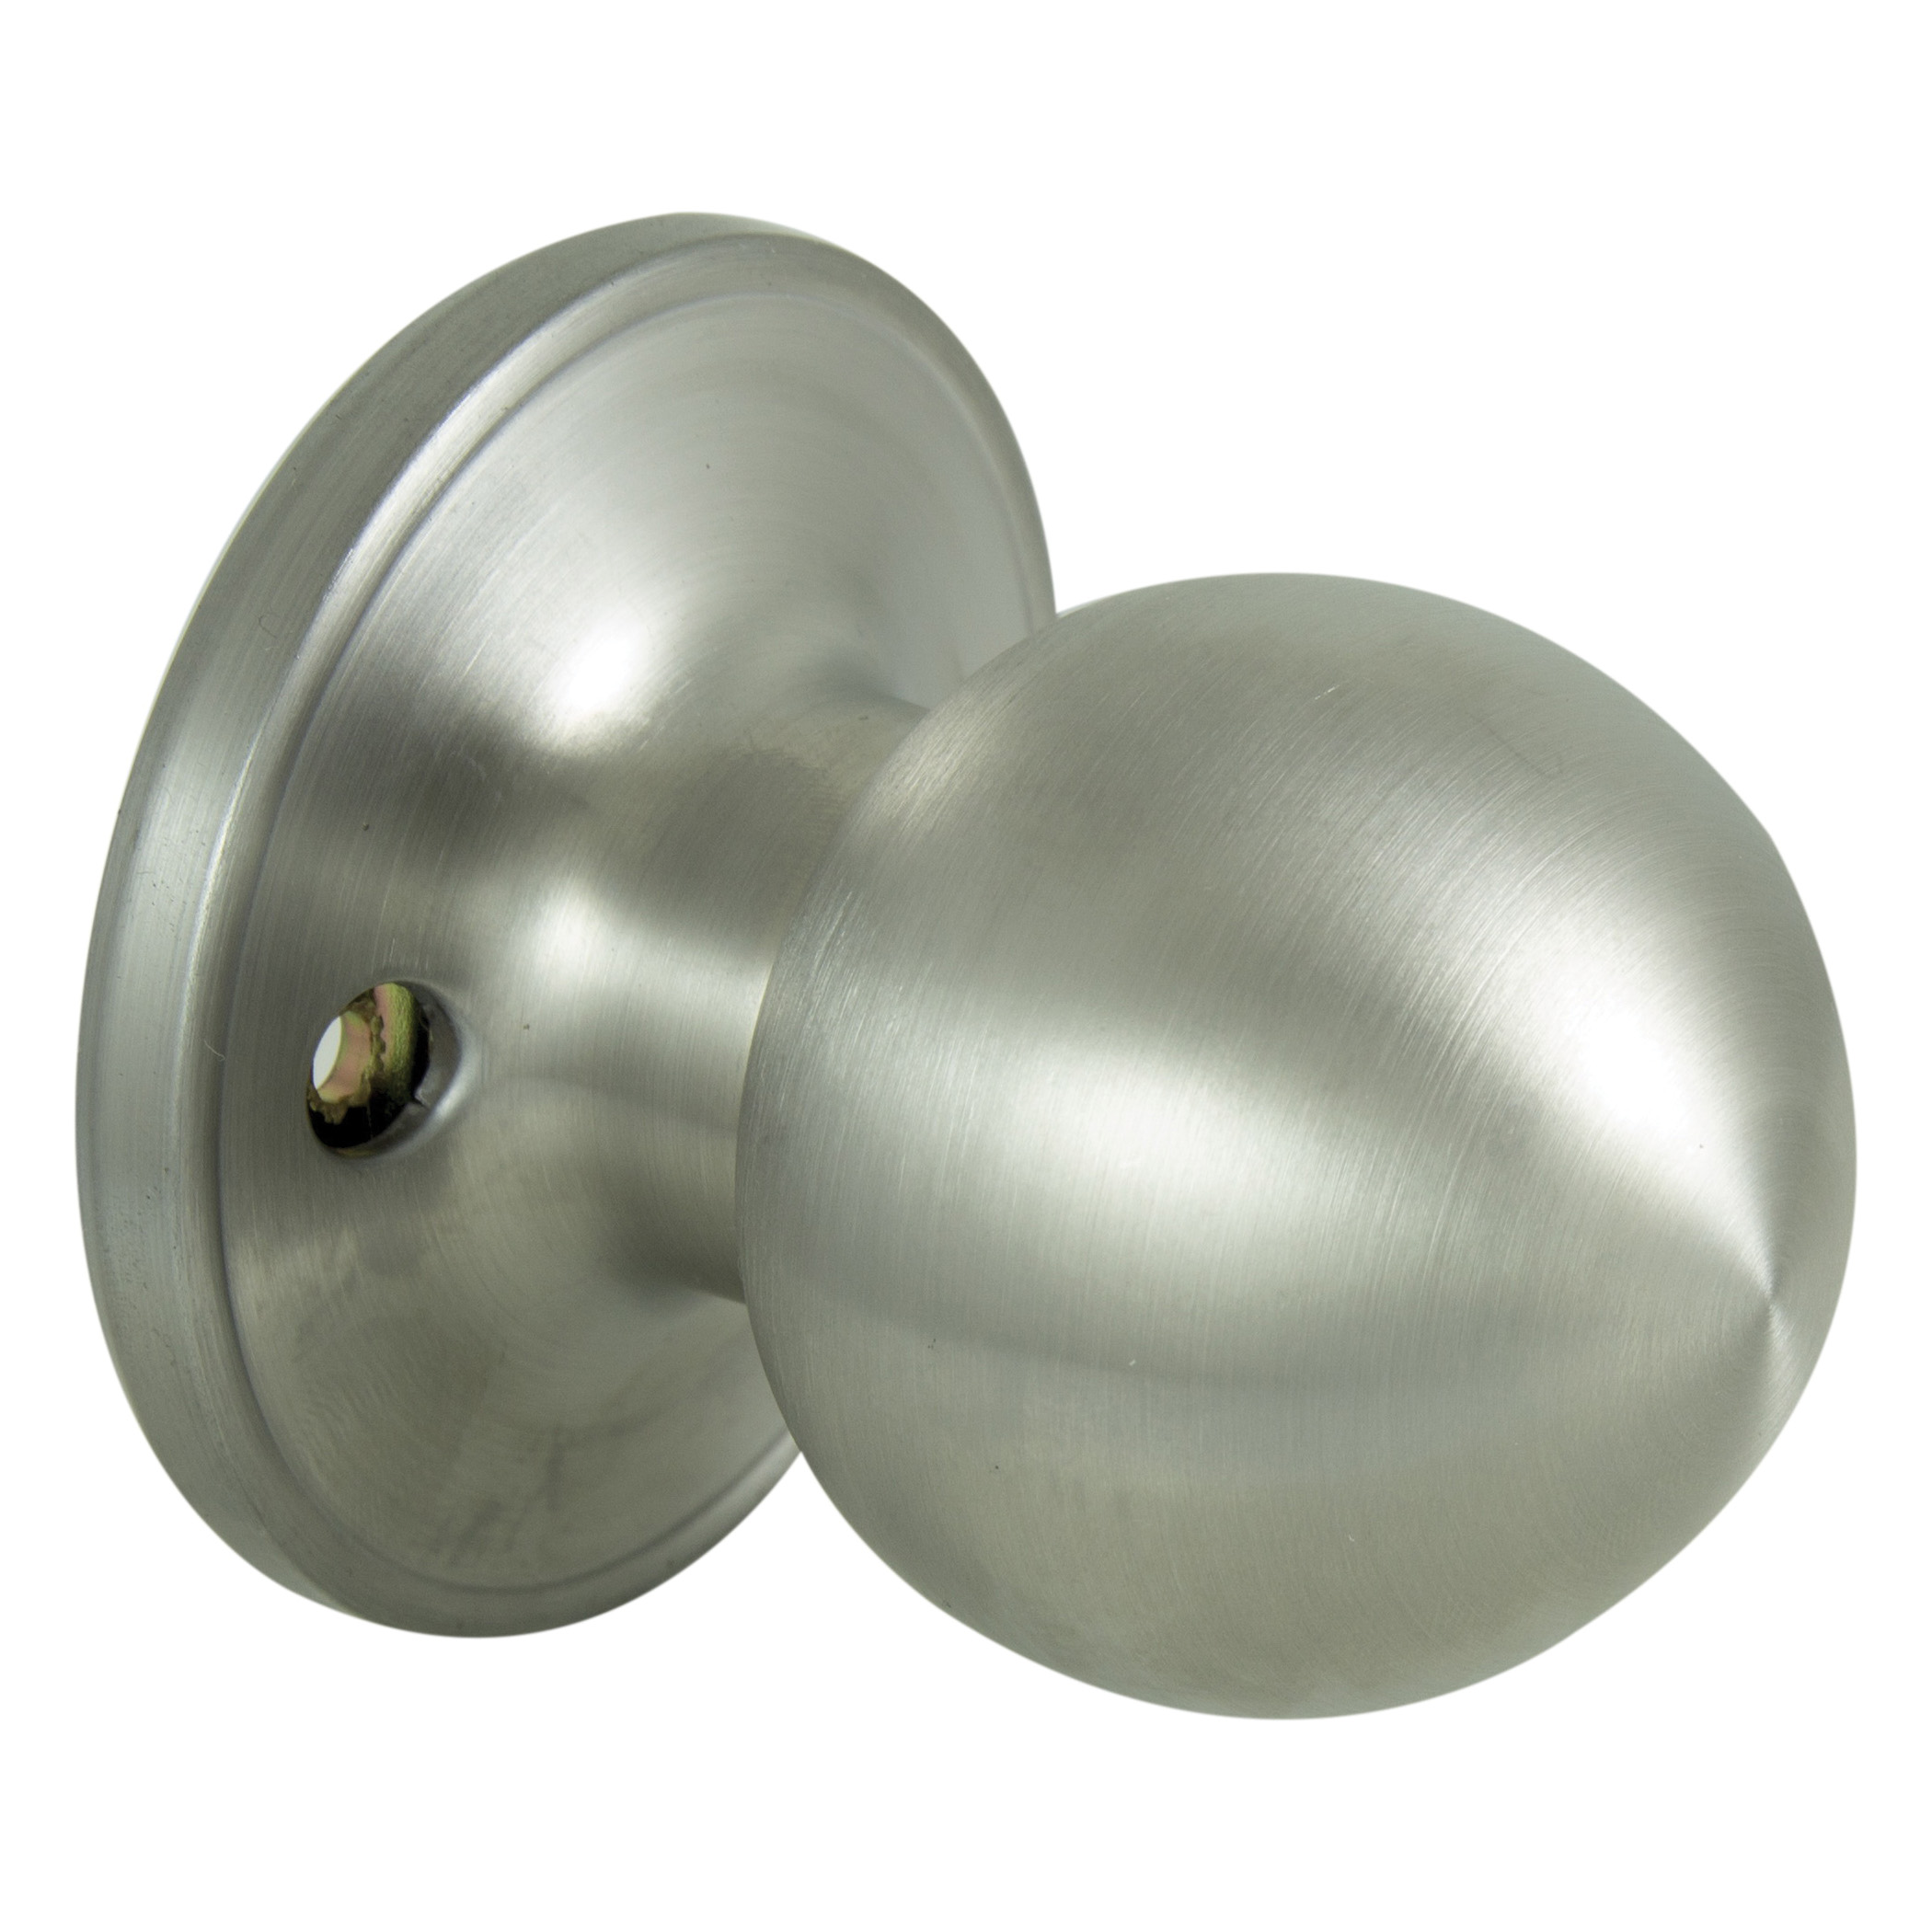 Dummy Knob, T3 Design, 1-3/8 to 1-3/4 in Thick Door, Stainless Steel, 65.7 mm Rose/Base